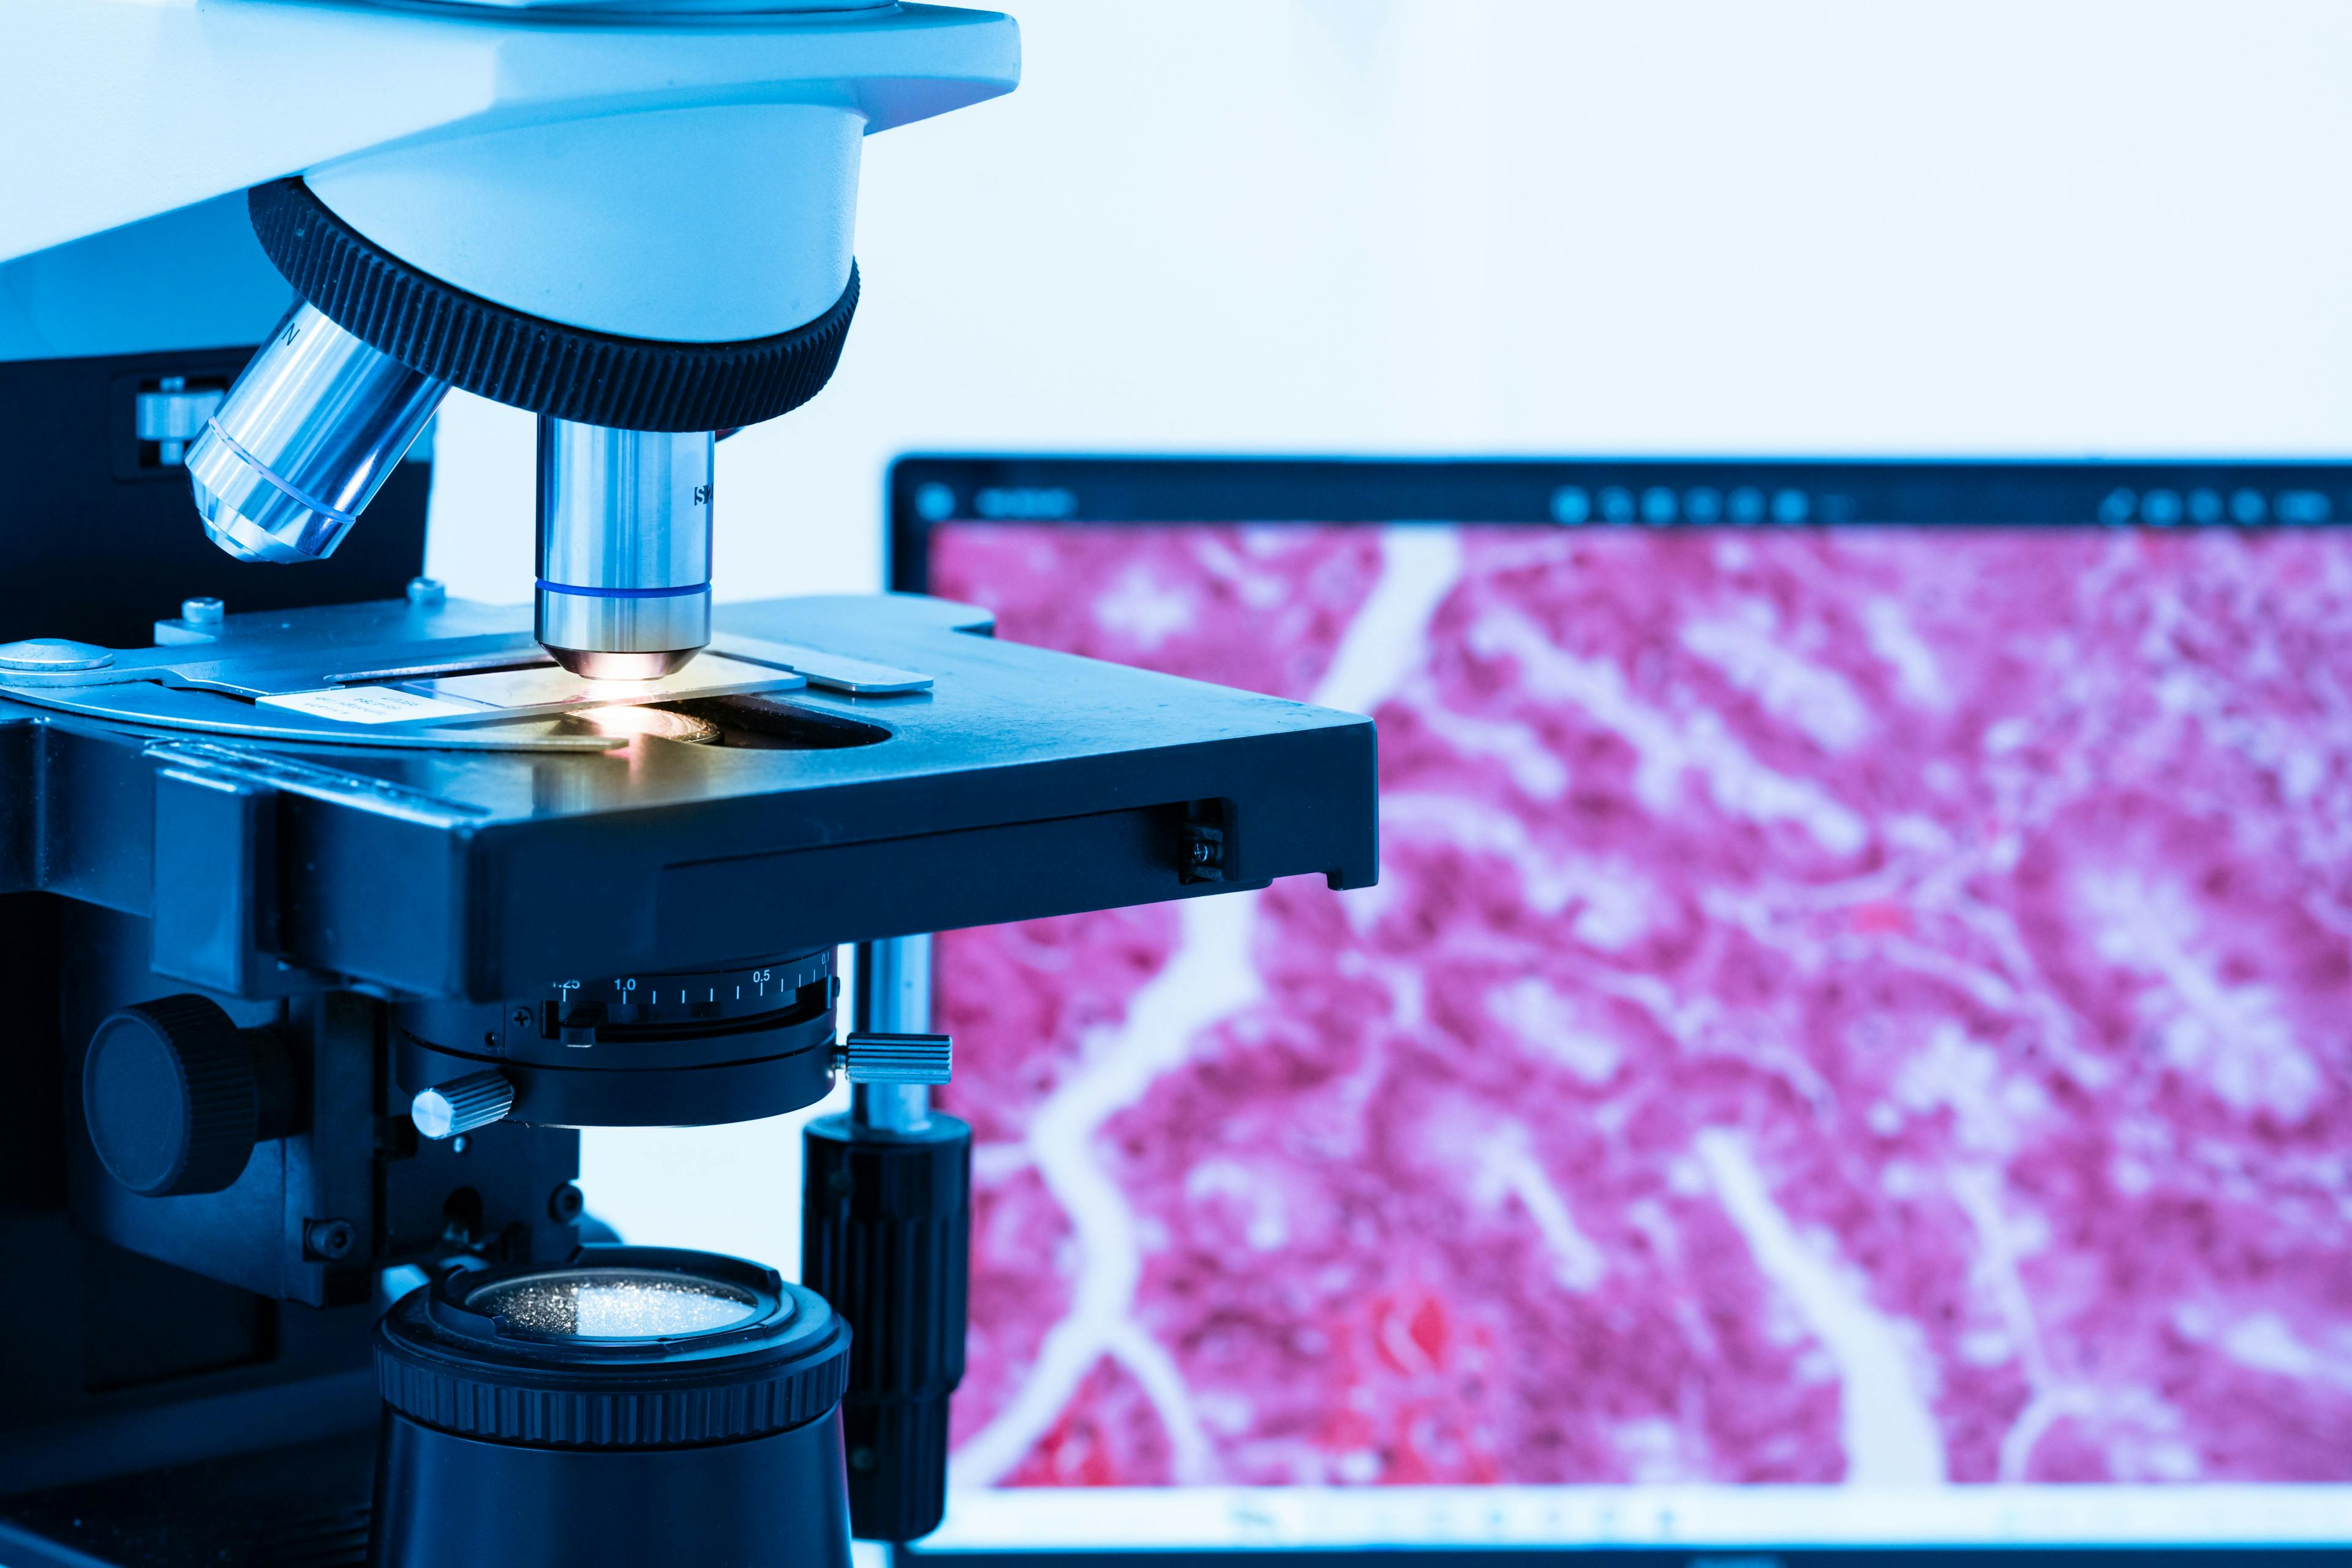 Modern microscope and human tissue section slide with computer monitor show glandular image. Medical patholology and cytology technology concept. Selective focus. | Image Credit: © arcyto - stock.adobe.com